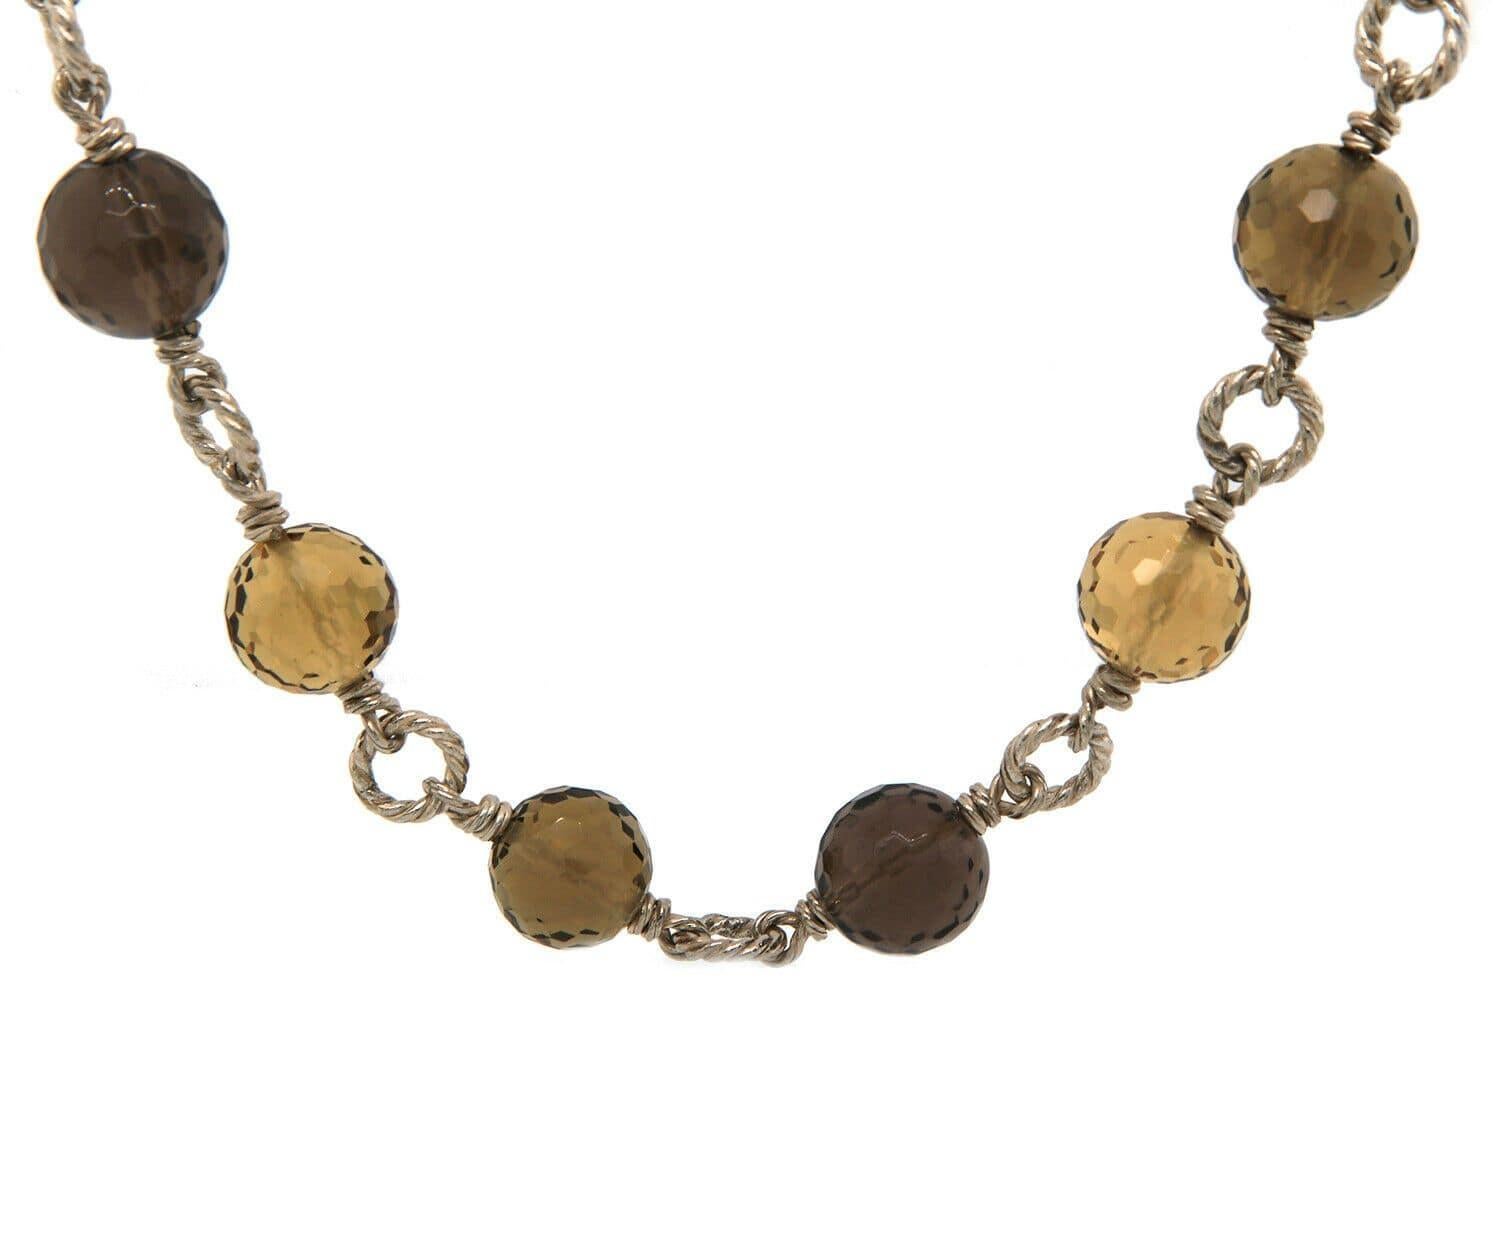 David Yurman Smokey Quartz and Citrine Bead Necklace in Sterling

David Yurman Smokey Quartz and Citrine Bead Necklace
Sterling Silver
Bead Size: Approx. 10.0 MM
Necklace Length: Approx. 38.0 Inches
Weight: Approx. 80.91 Grams
Stamped: ©D.Y.,